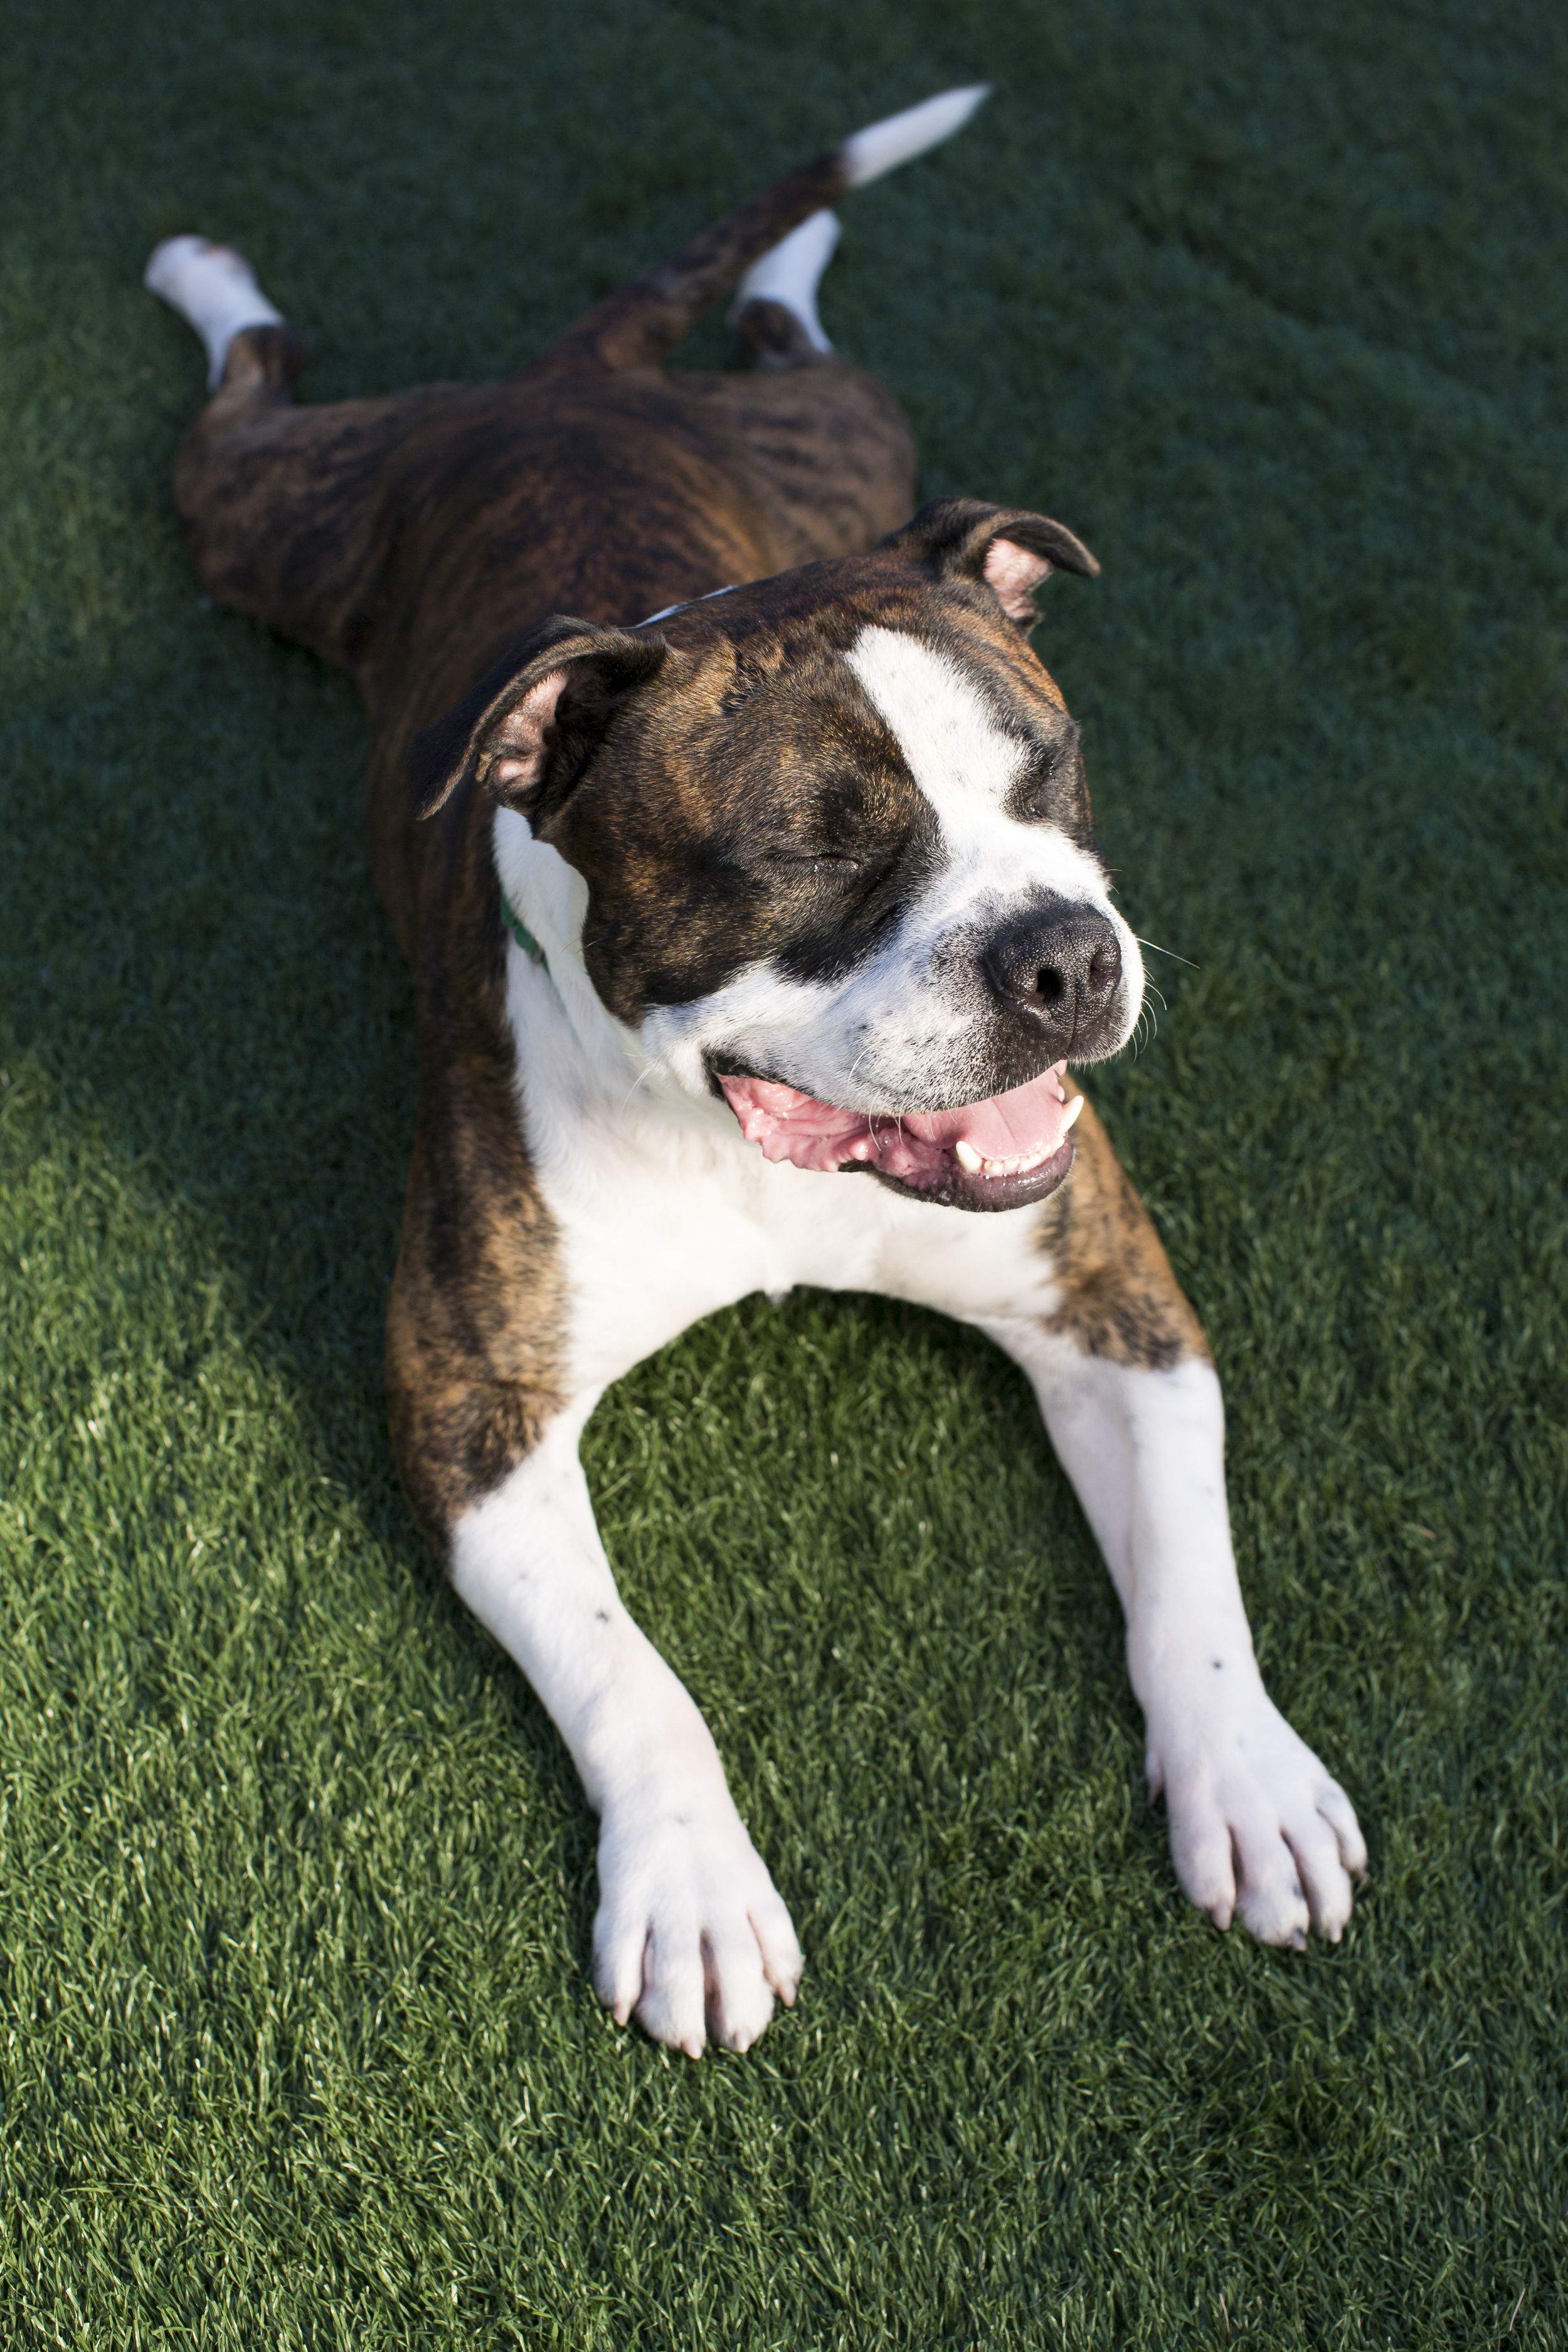 27 Bulldog mix outdoor dog pet photography session laying on green grass.jpg